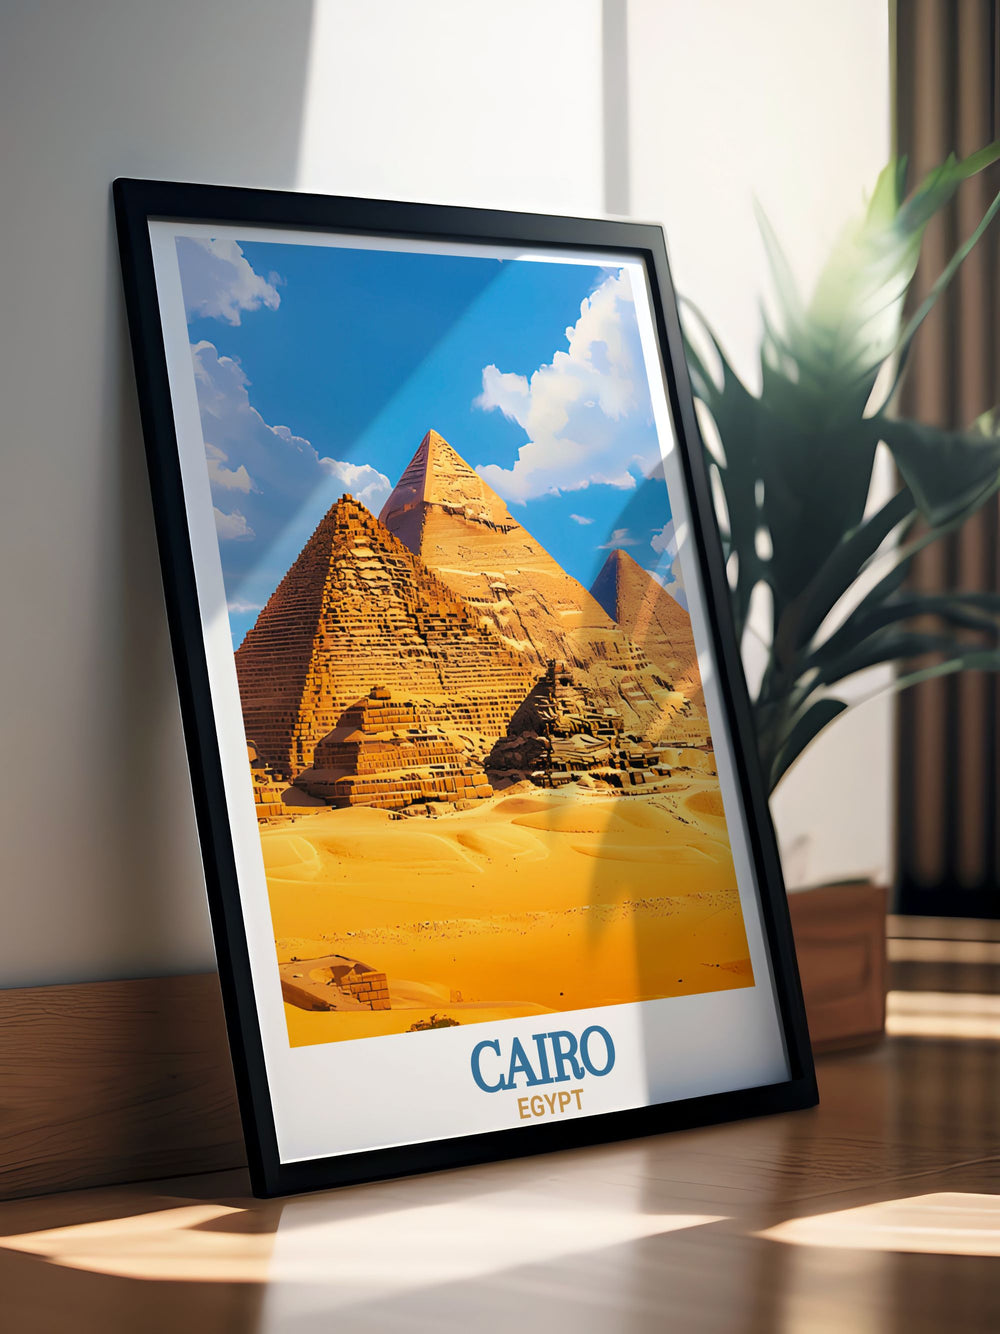 This beautiful Pyramids of Giza poster showcases the architectural grandeur and historical significance of Egypt making it a great addition to any art collection and a thoughtful personalized gift.